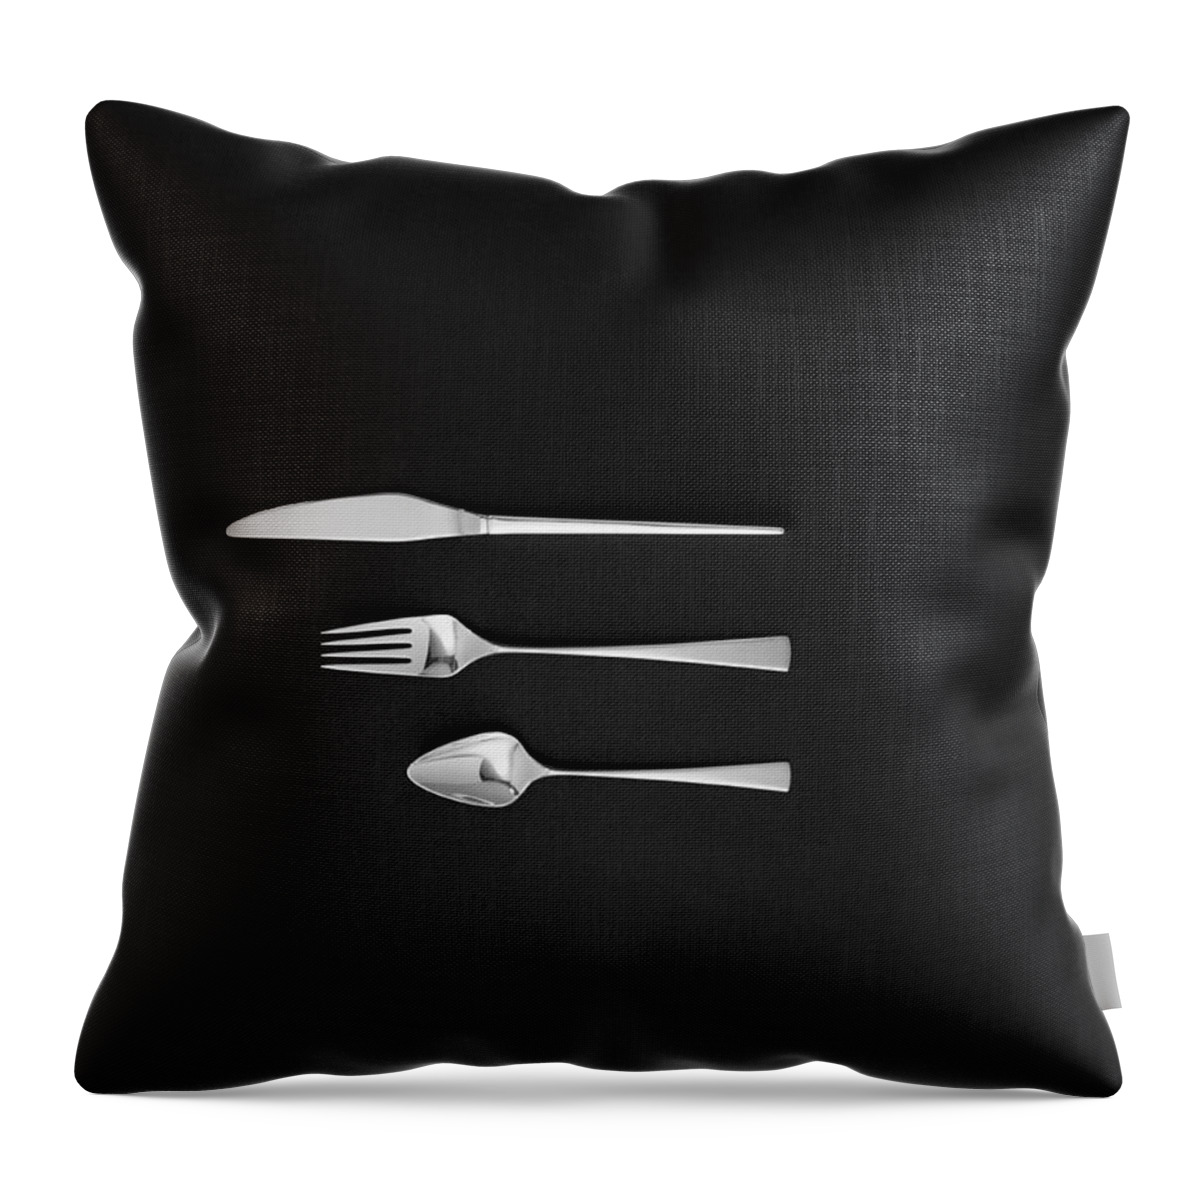 In A Row Throw Pillow featuring the photograph Spoon, Fork And Butter Knife On Black by Tom Kelley Archive